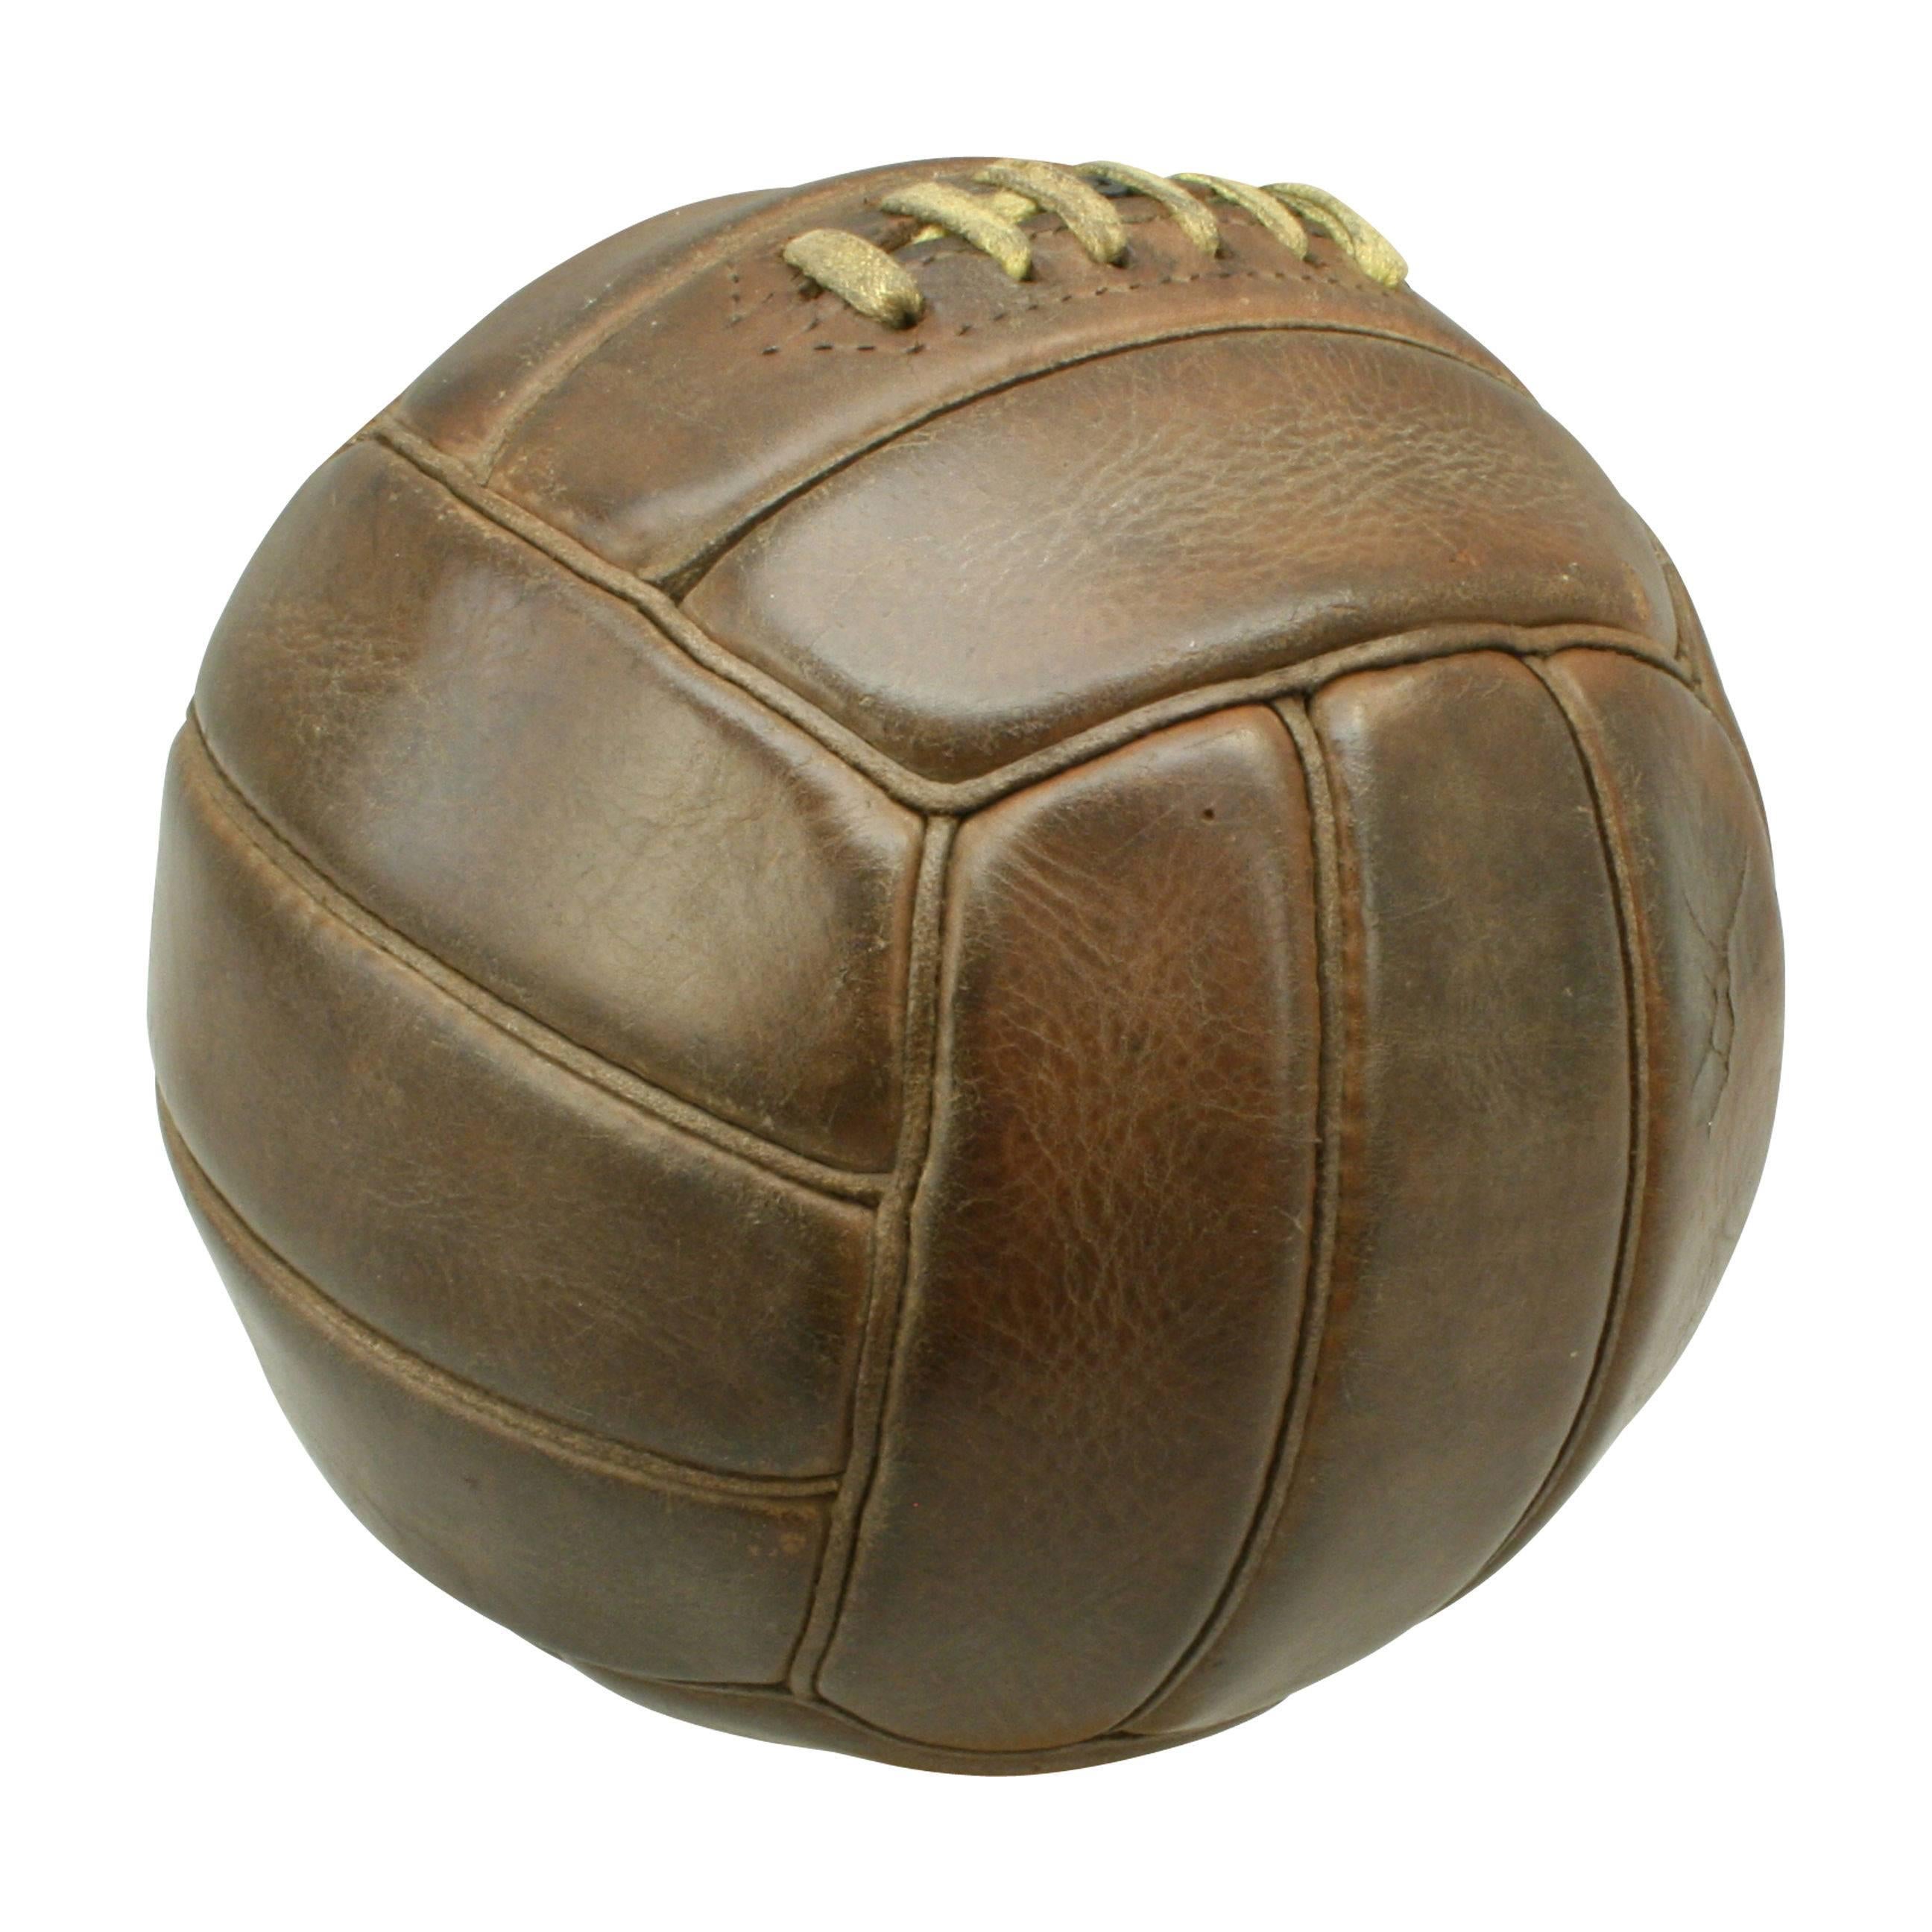 A traditional 18-panel dark brown leather netball ball in very good original condition and colour. The ball has a lace-up slit to the top to enable bladder inflation or replacement. The ball is very similar to a football except that the panels have